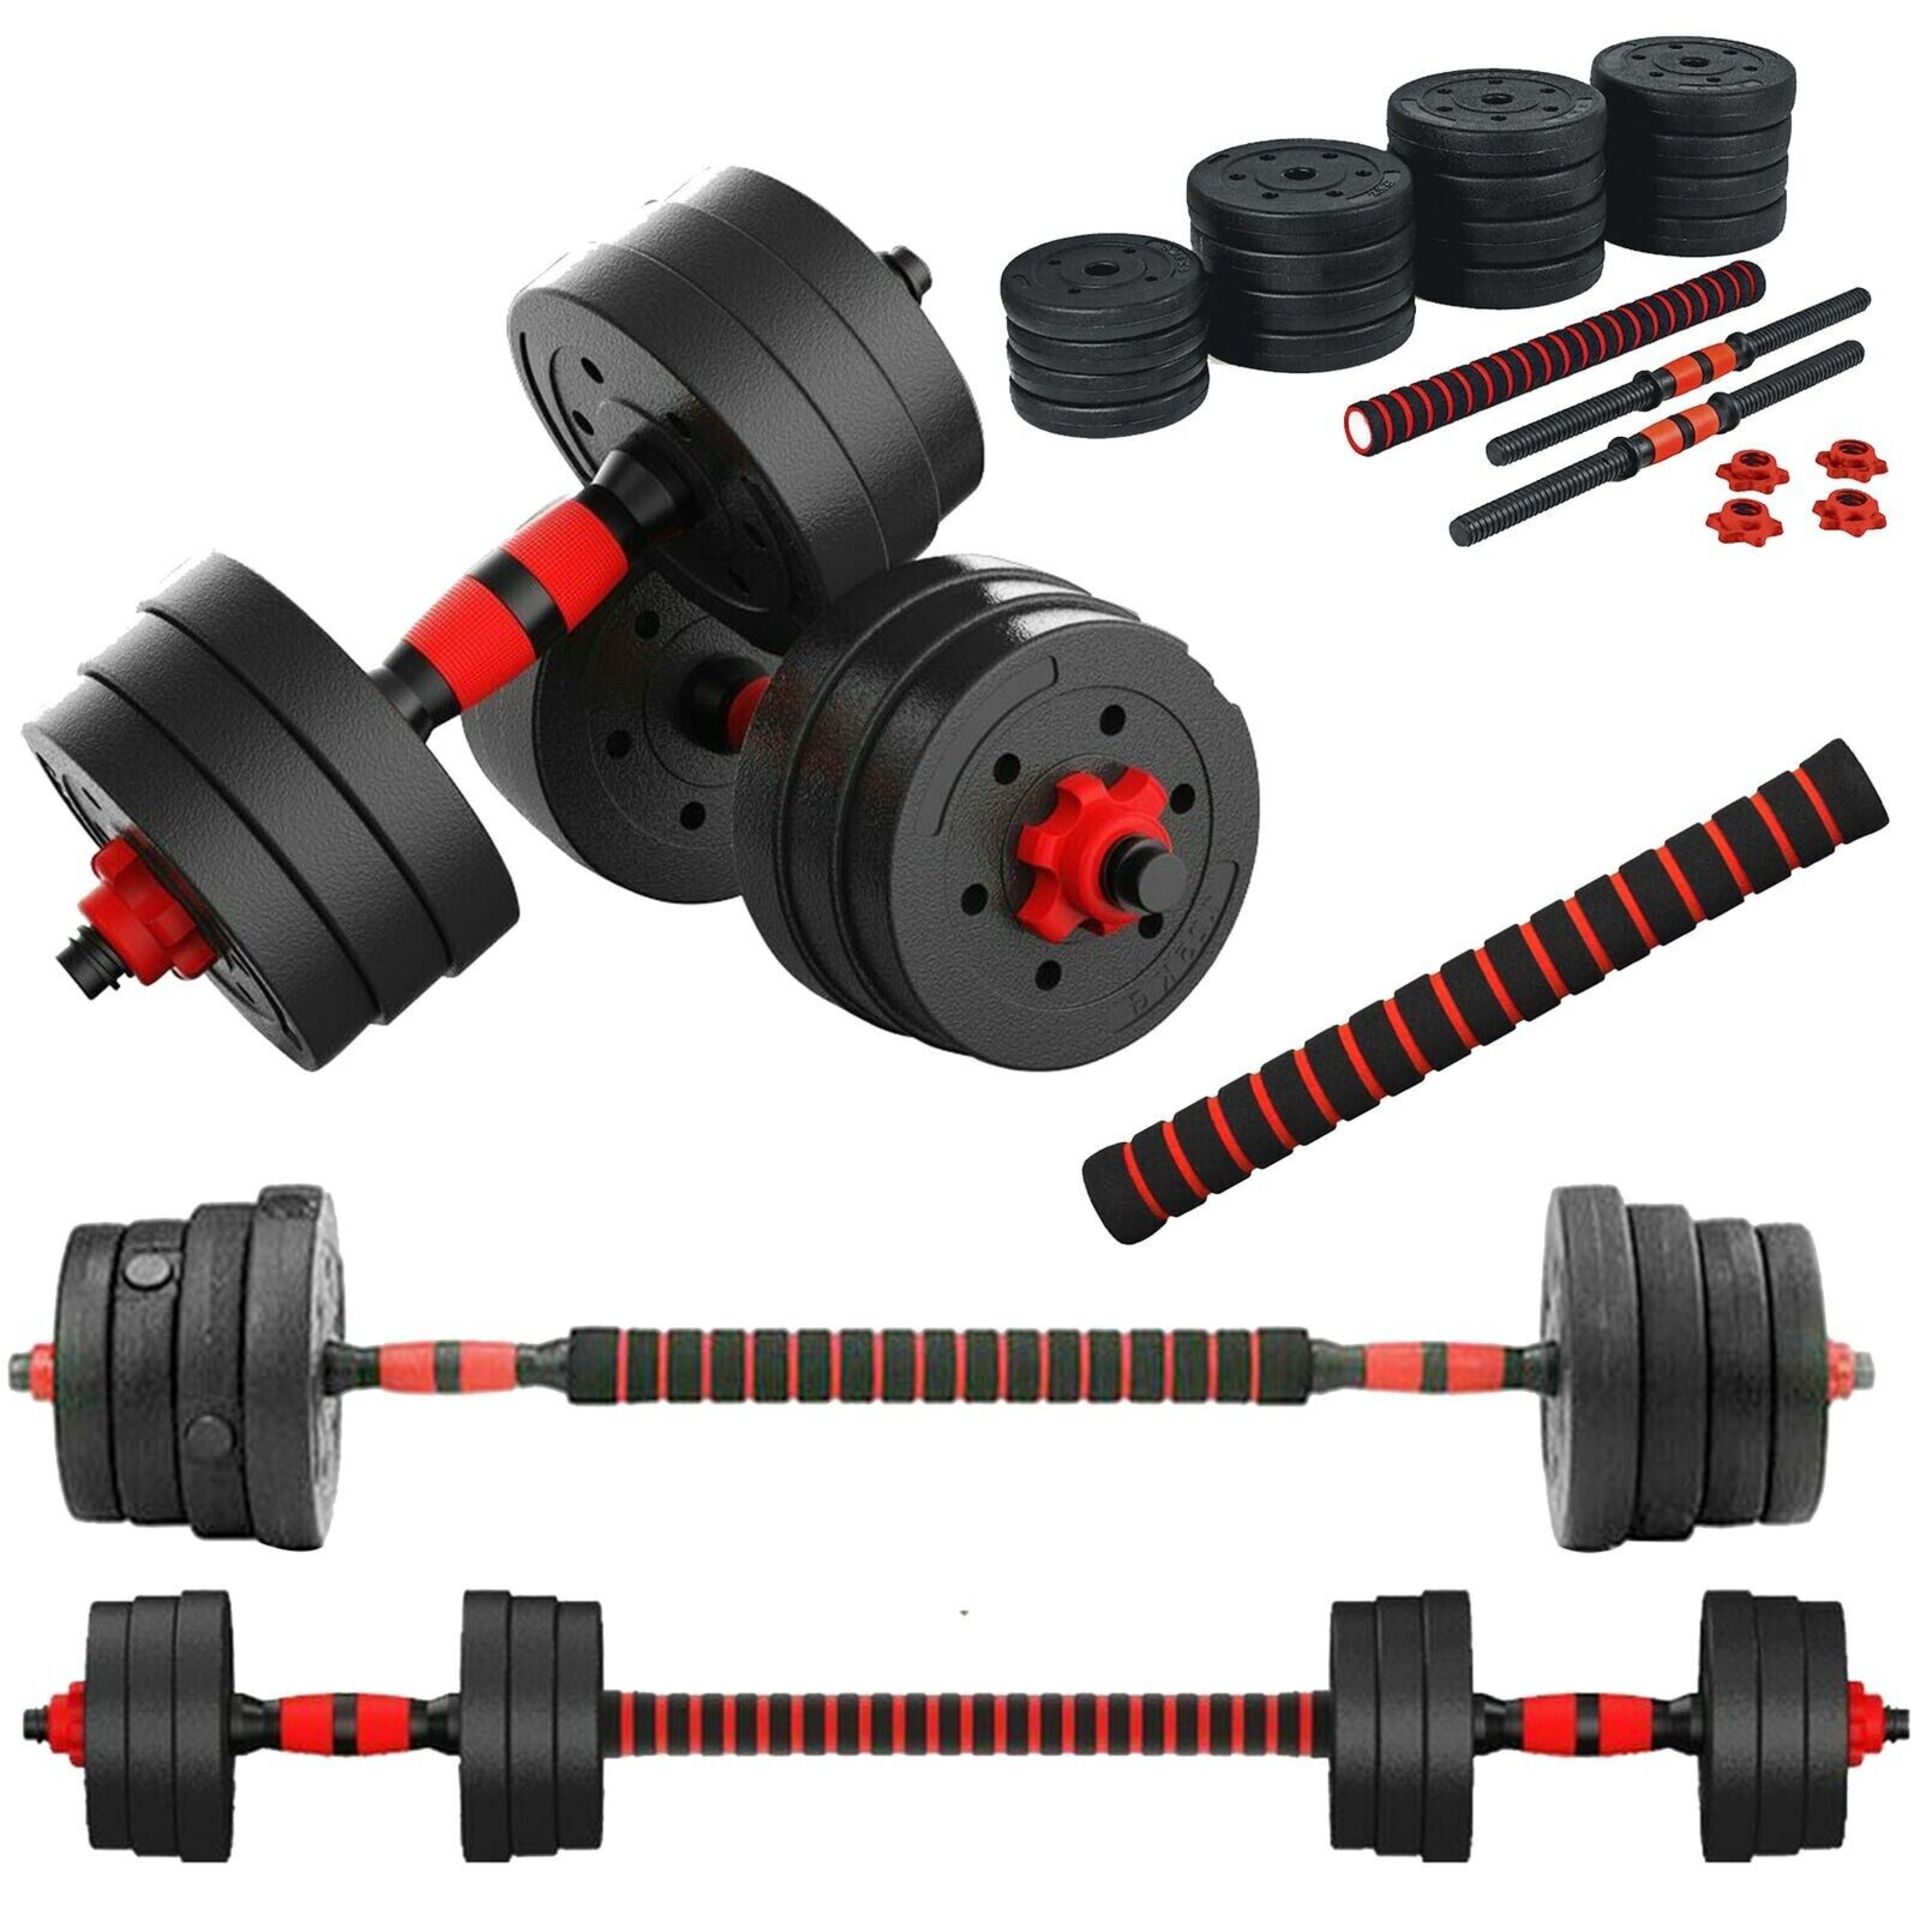 PALLET TO CONTAIN 17 X SETS OF 40kg Dumbbell Barbell Bar Weight Set. (PALLET ID: 1) Adjustable